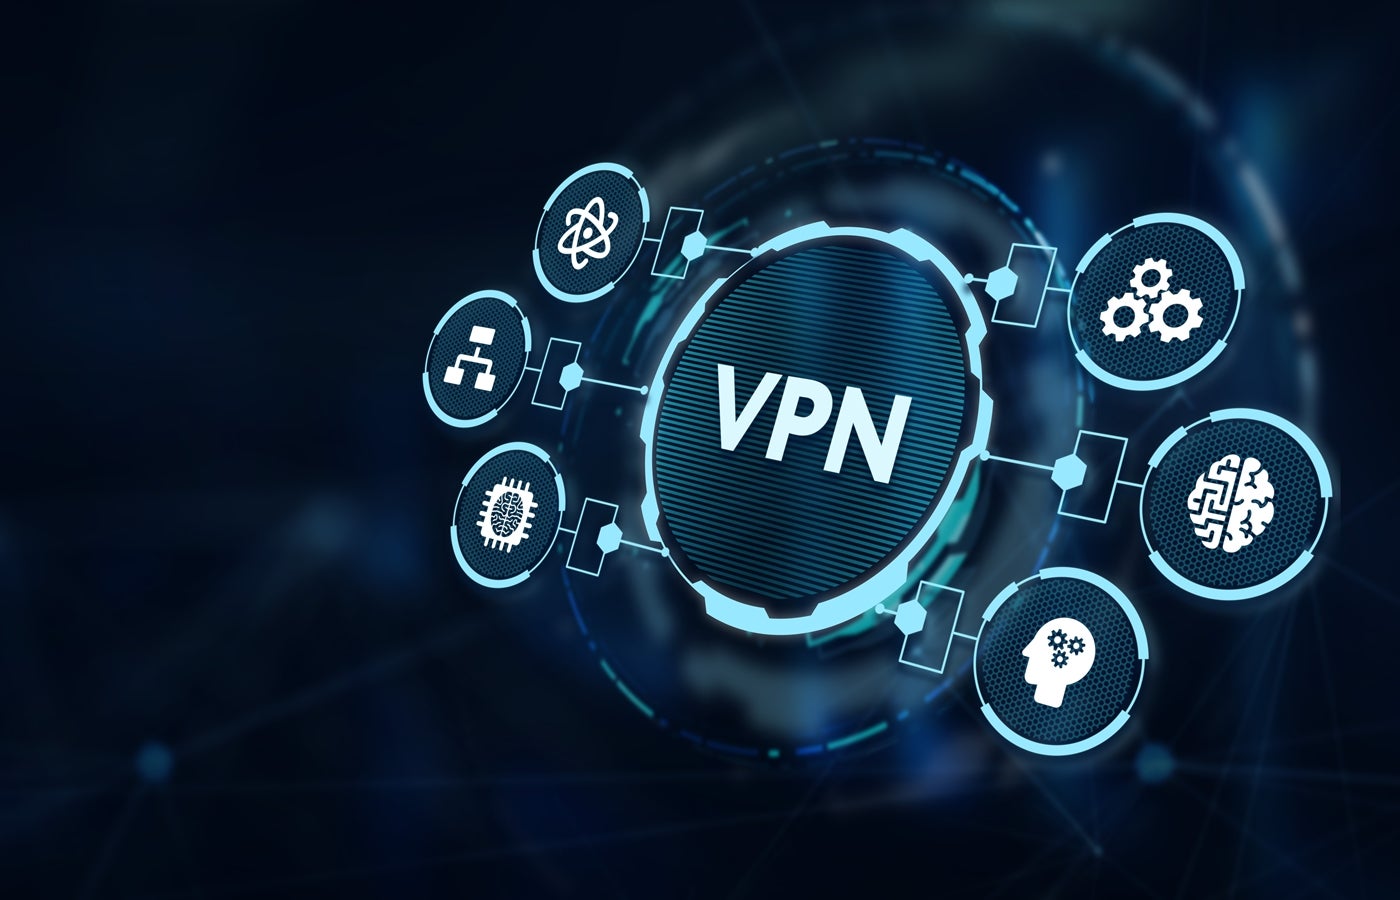 How-to-Install-a-VPN-on-Your-Router.jpg